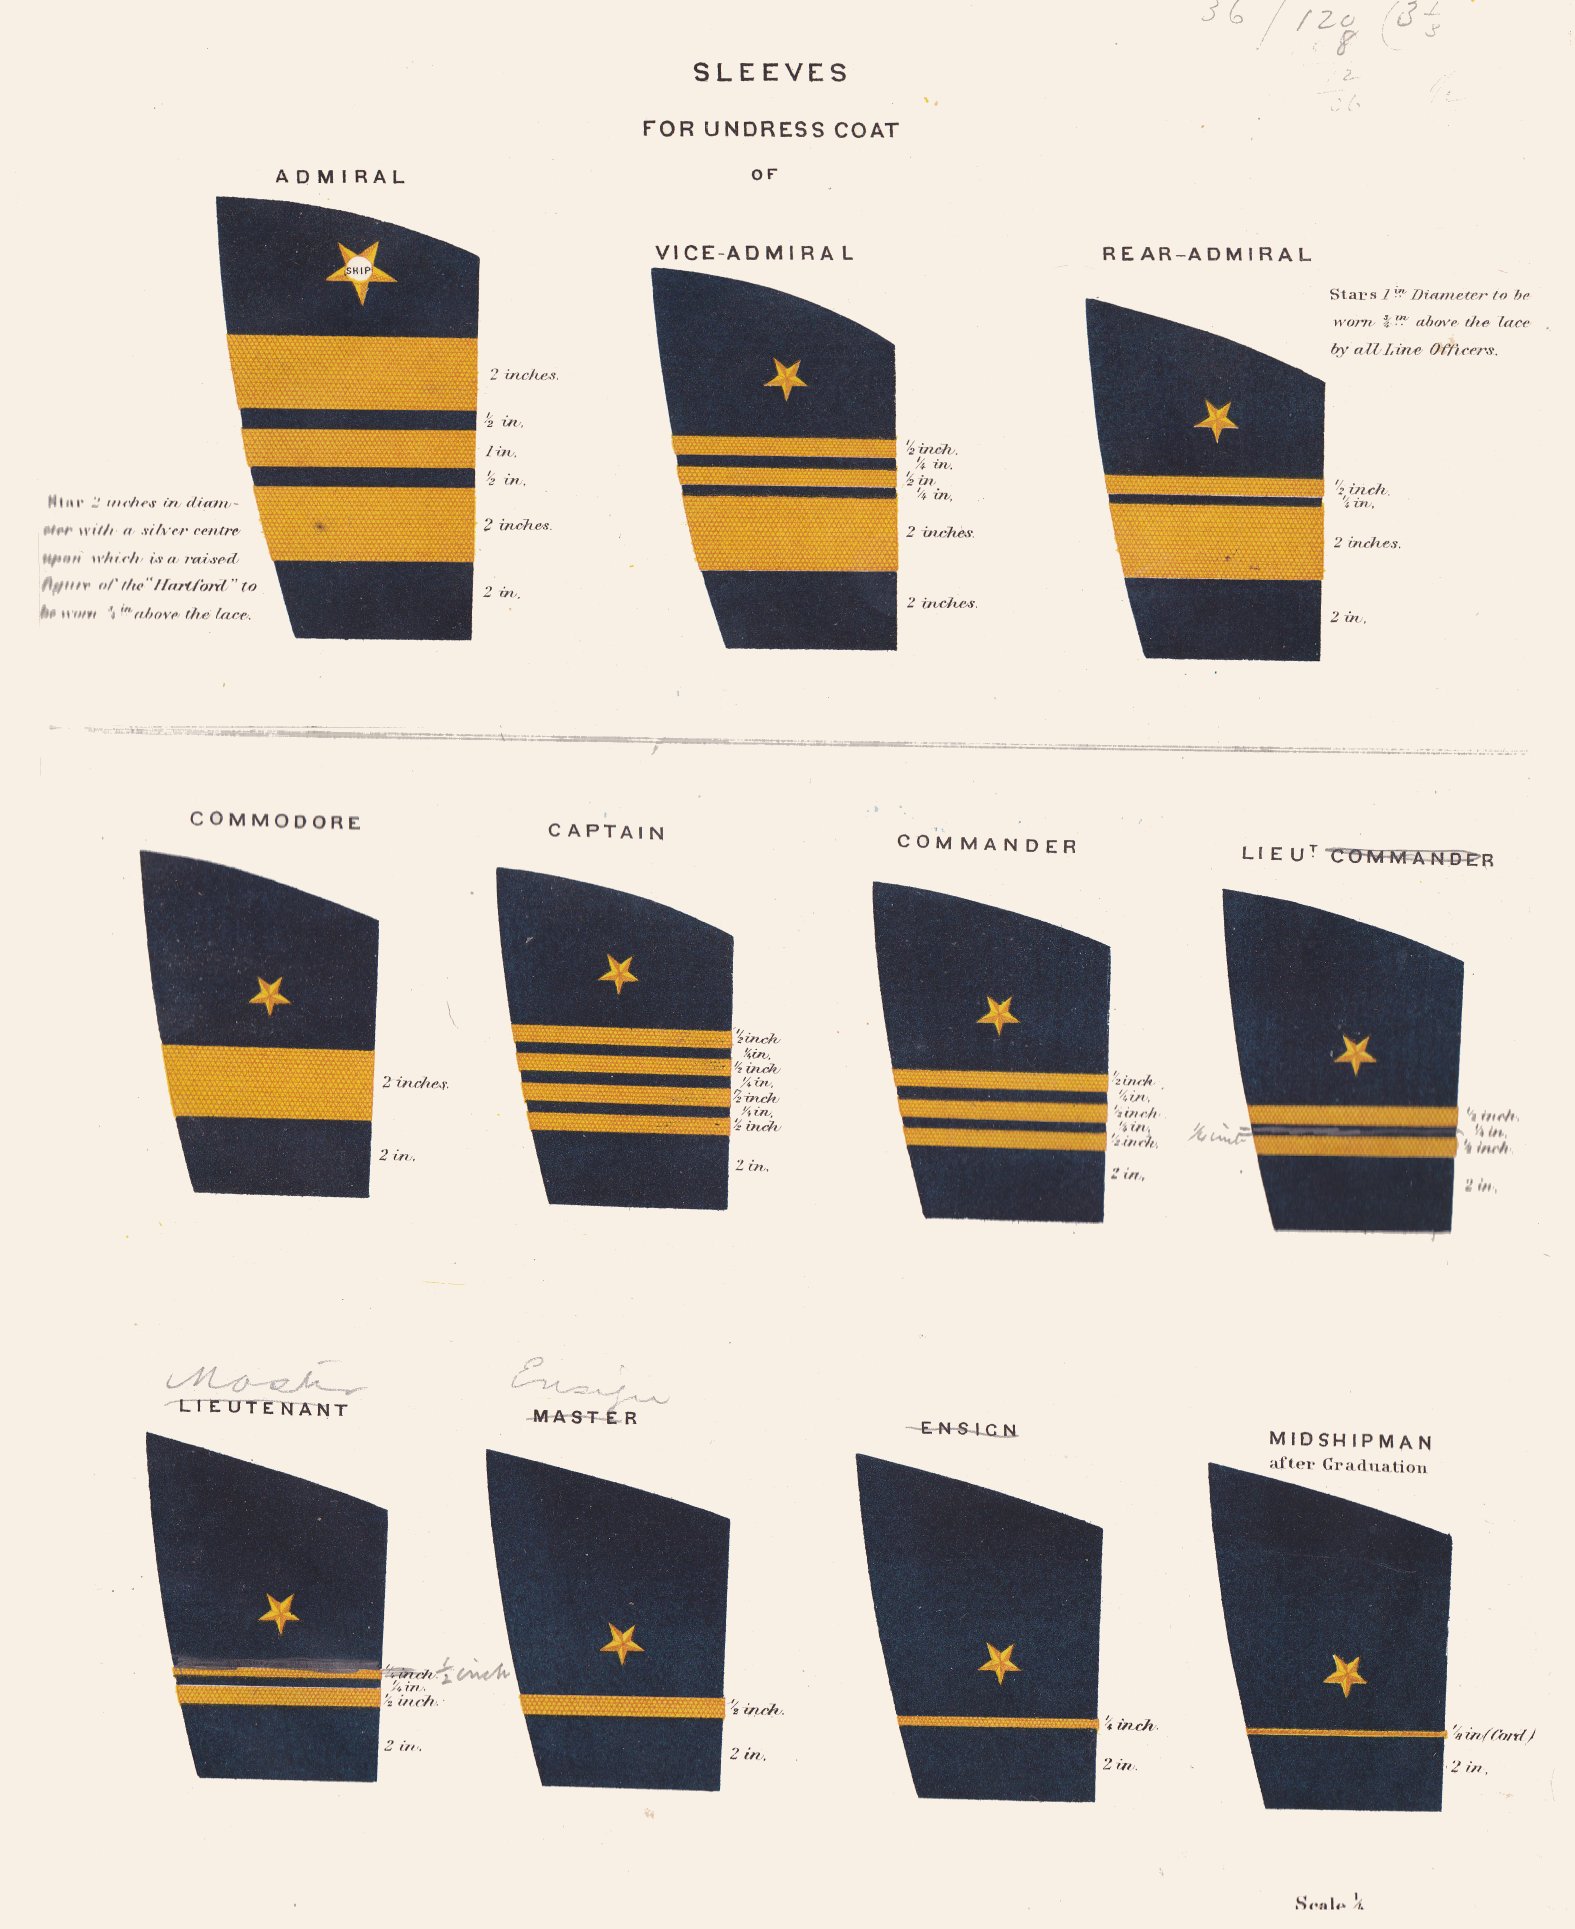 US Navy Sleeve Rank: Everything You Need to Know - News Military